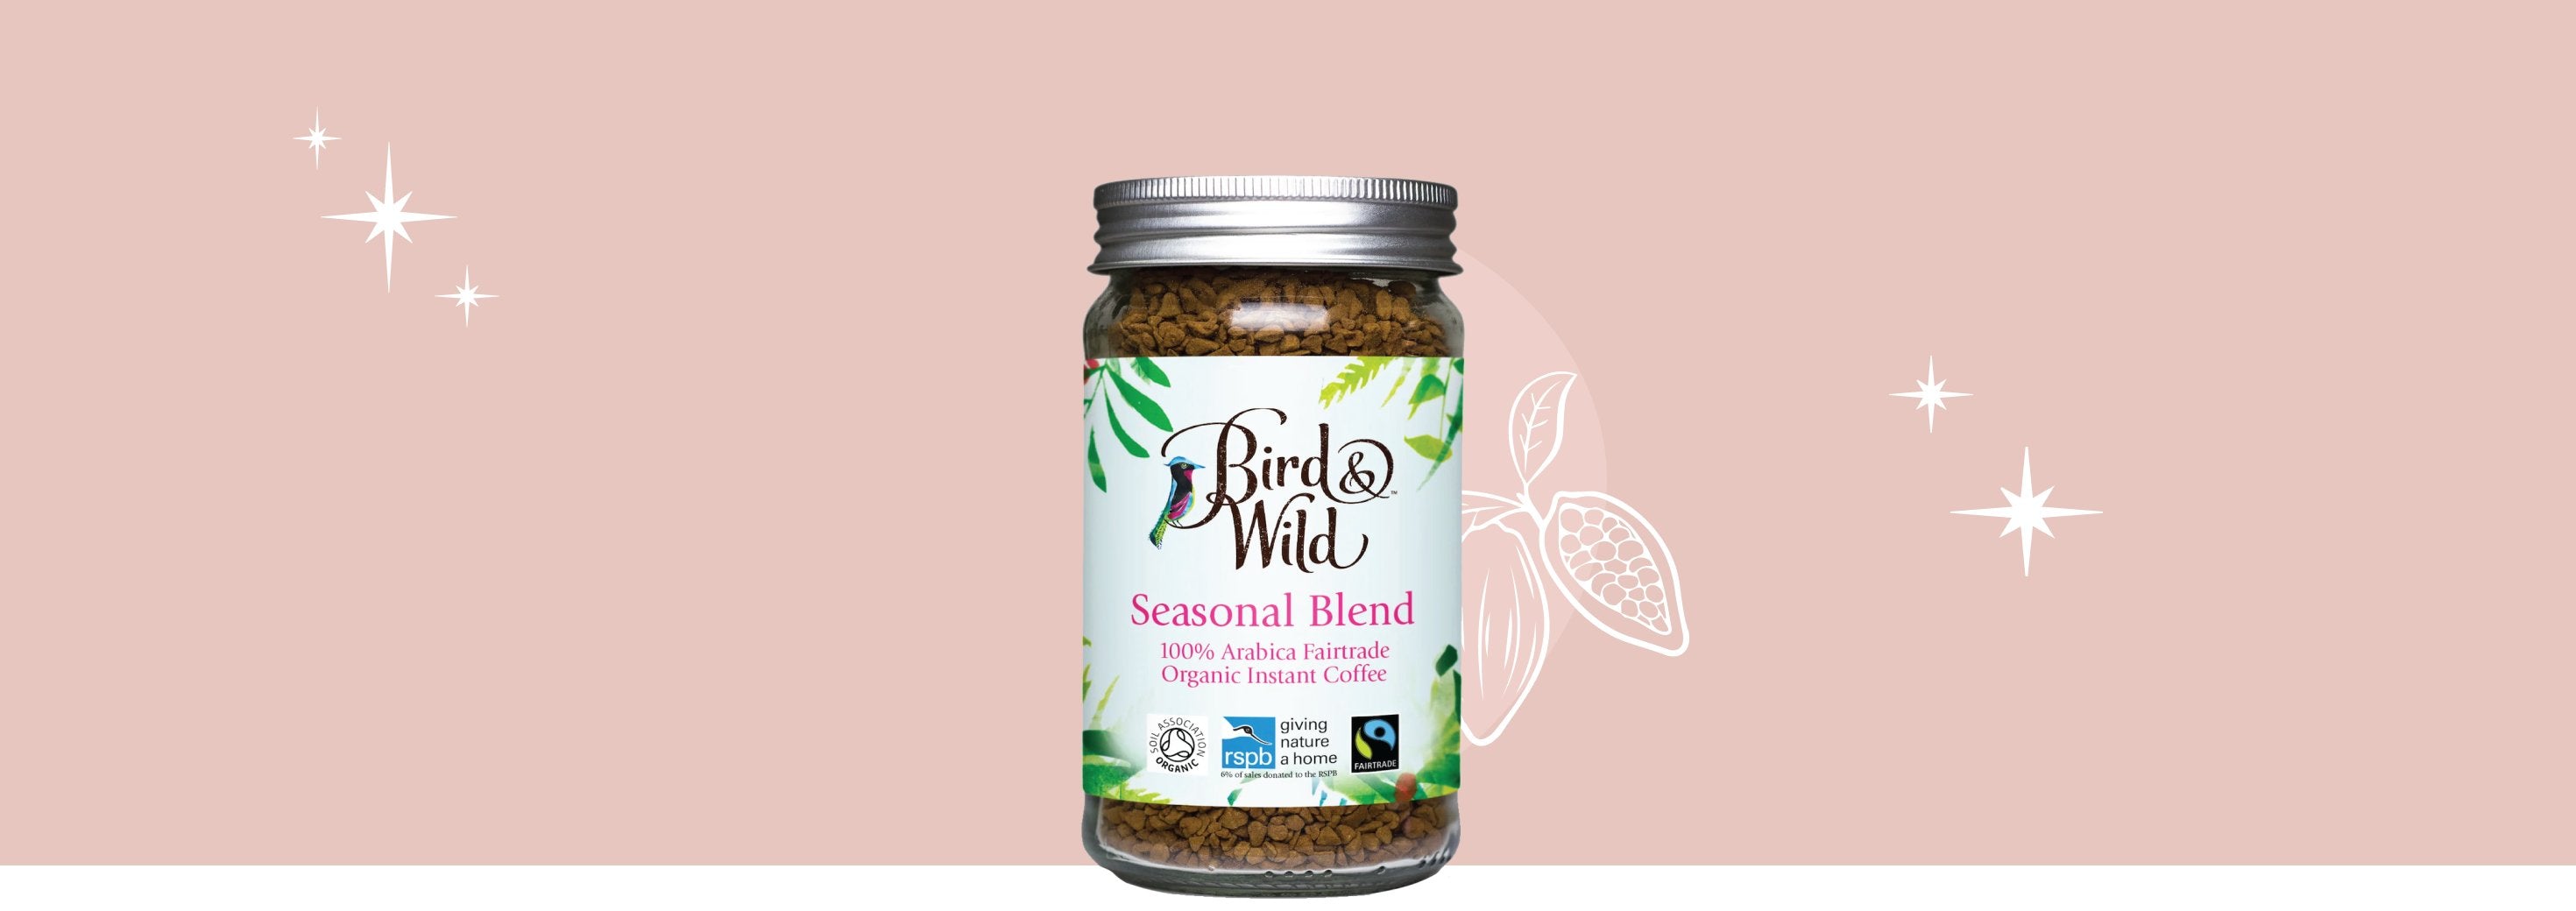 Bird & Wild Instant Coffee now available on our website - Bird & Wild Coffee